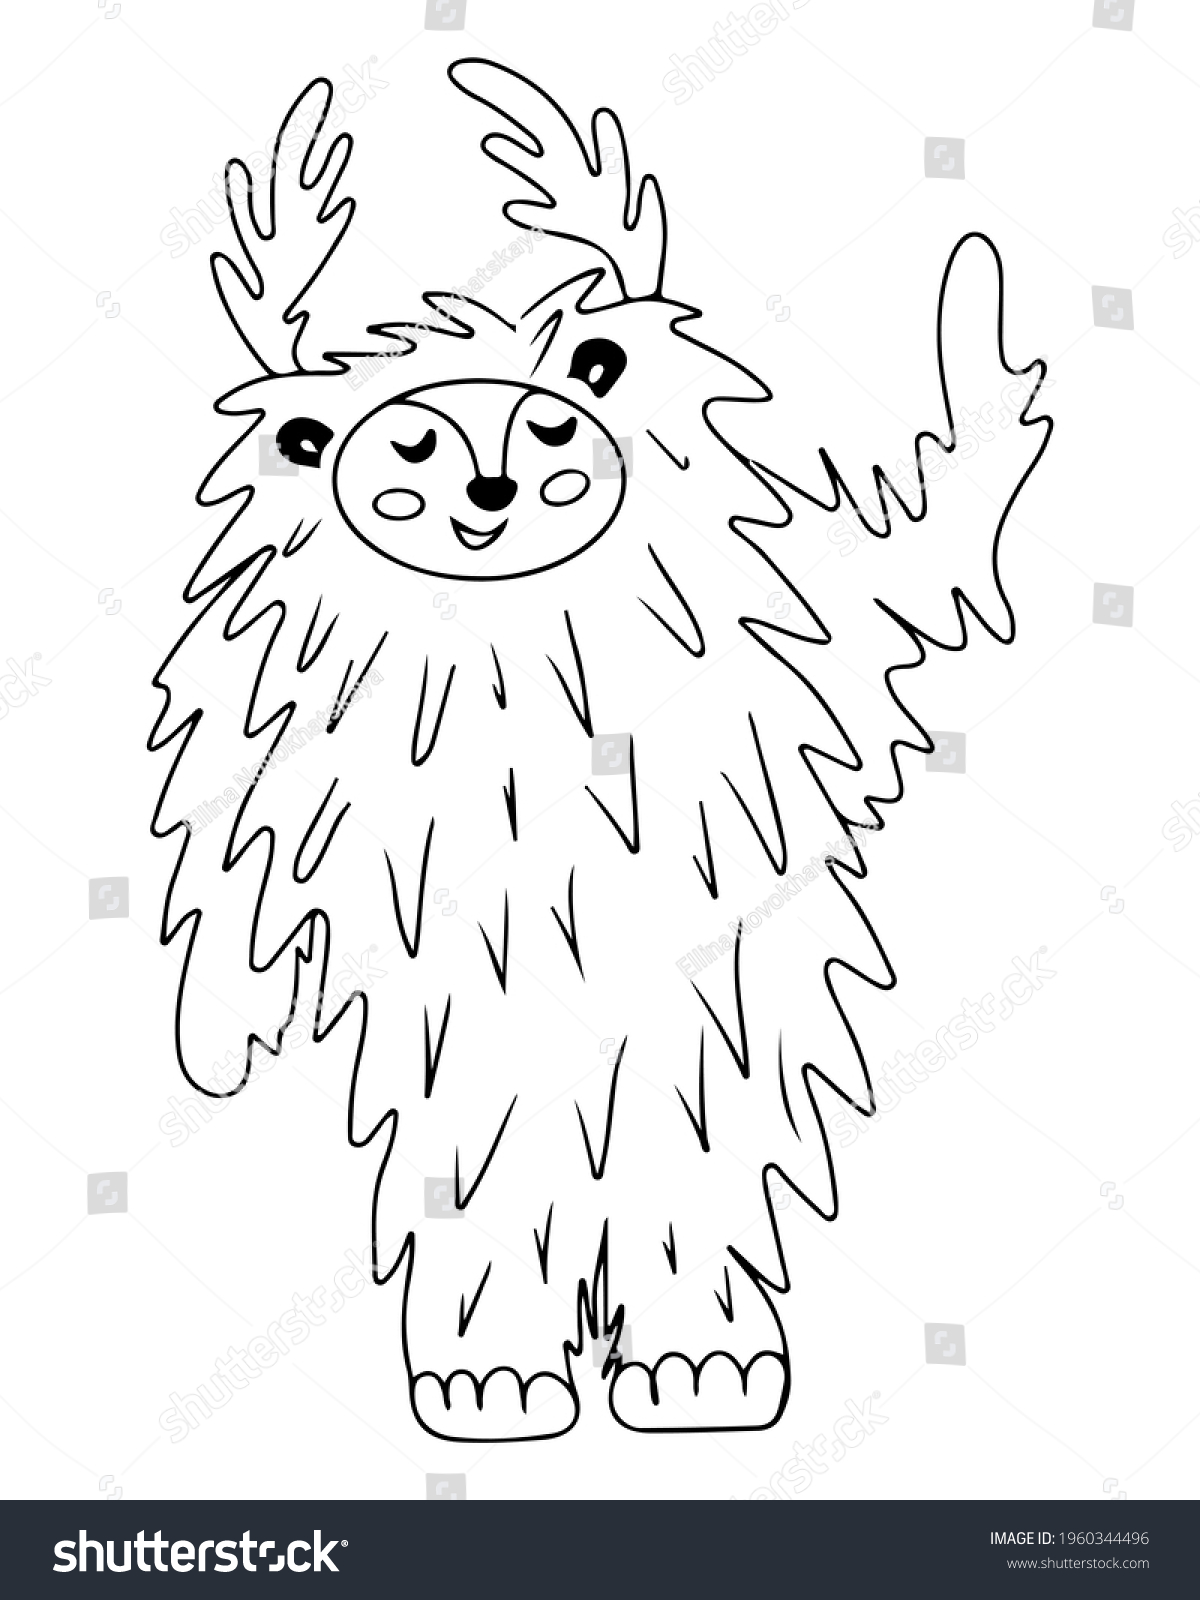 Black line yeti coloring book page stock vector royalty free